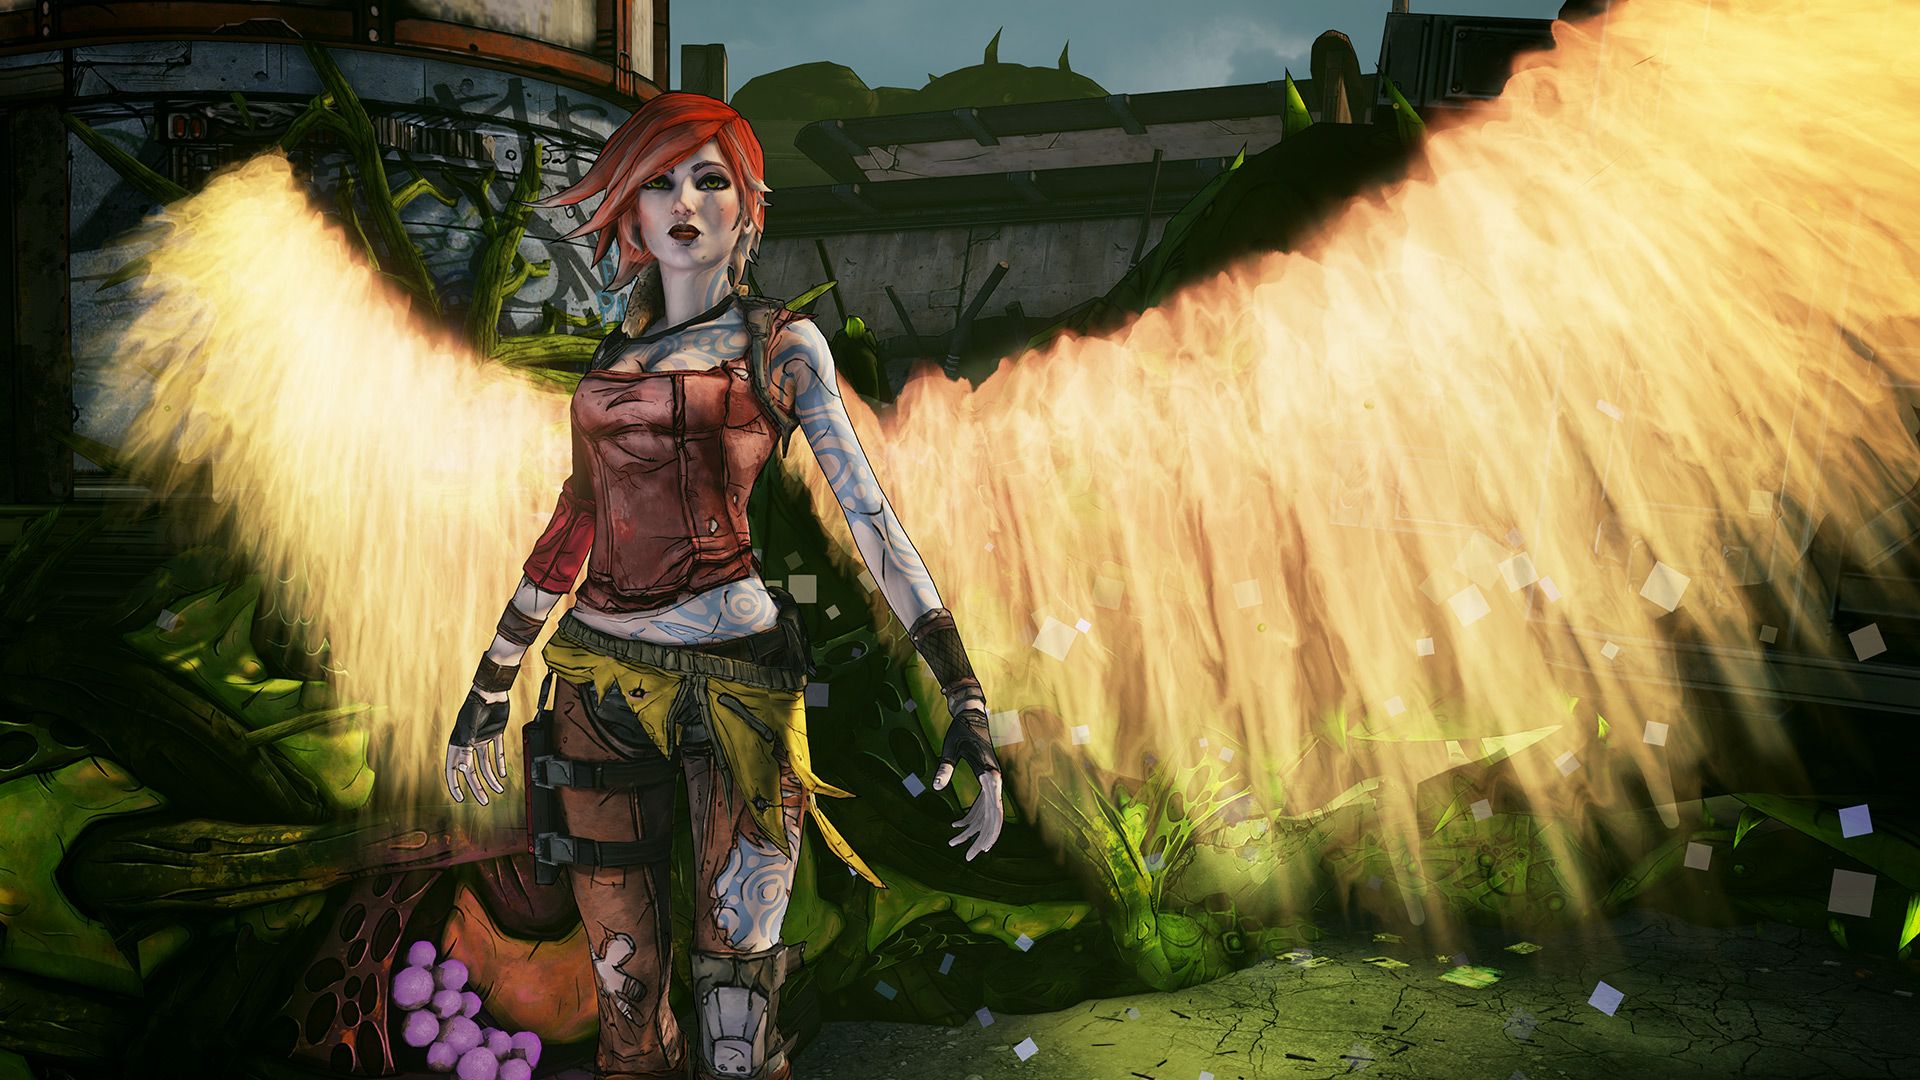 Borderlands 2 Commander Lilith And The Fight For Sanctuary Is Now Available For Free